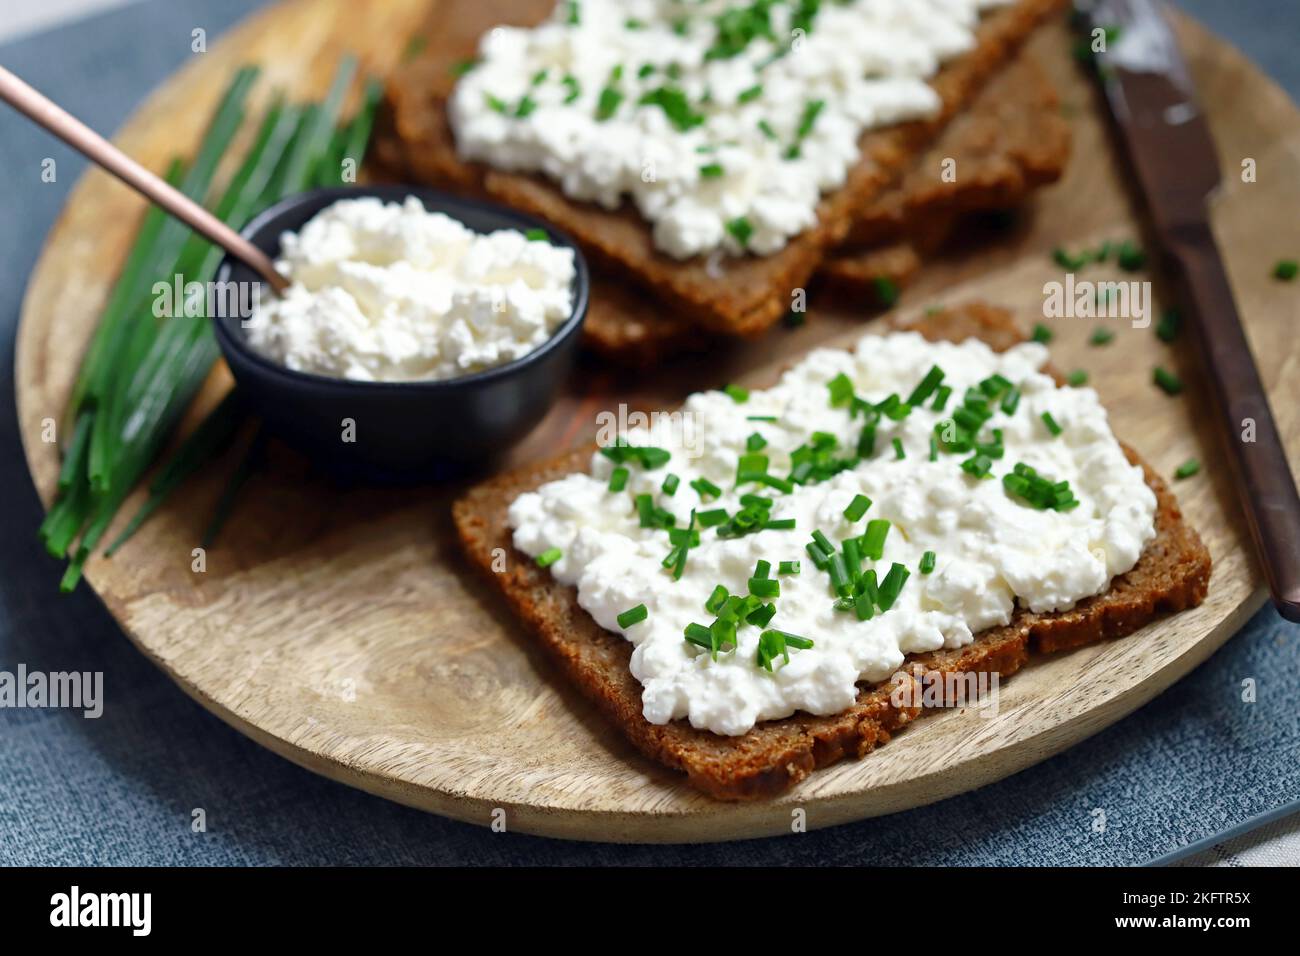 Open sandwiches with rye bread and white cottage cheese with green onions. Healthy breakfast or snack. Stock Photo